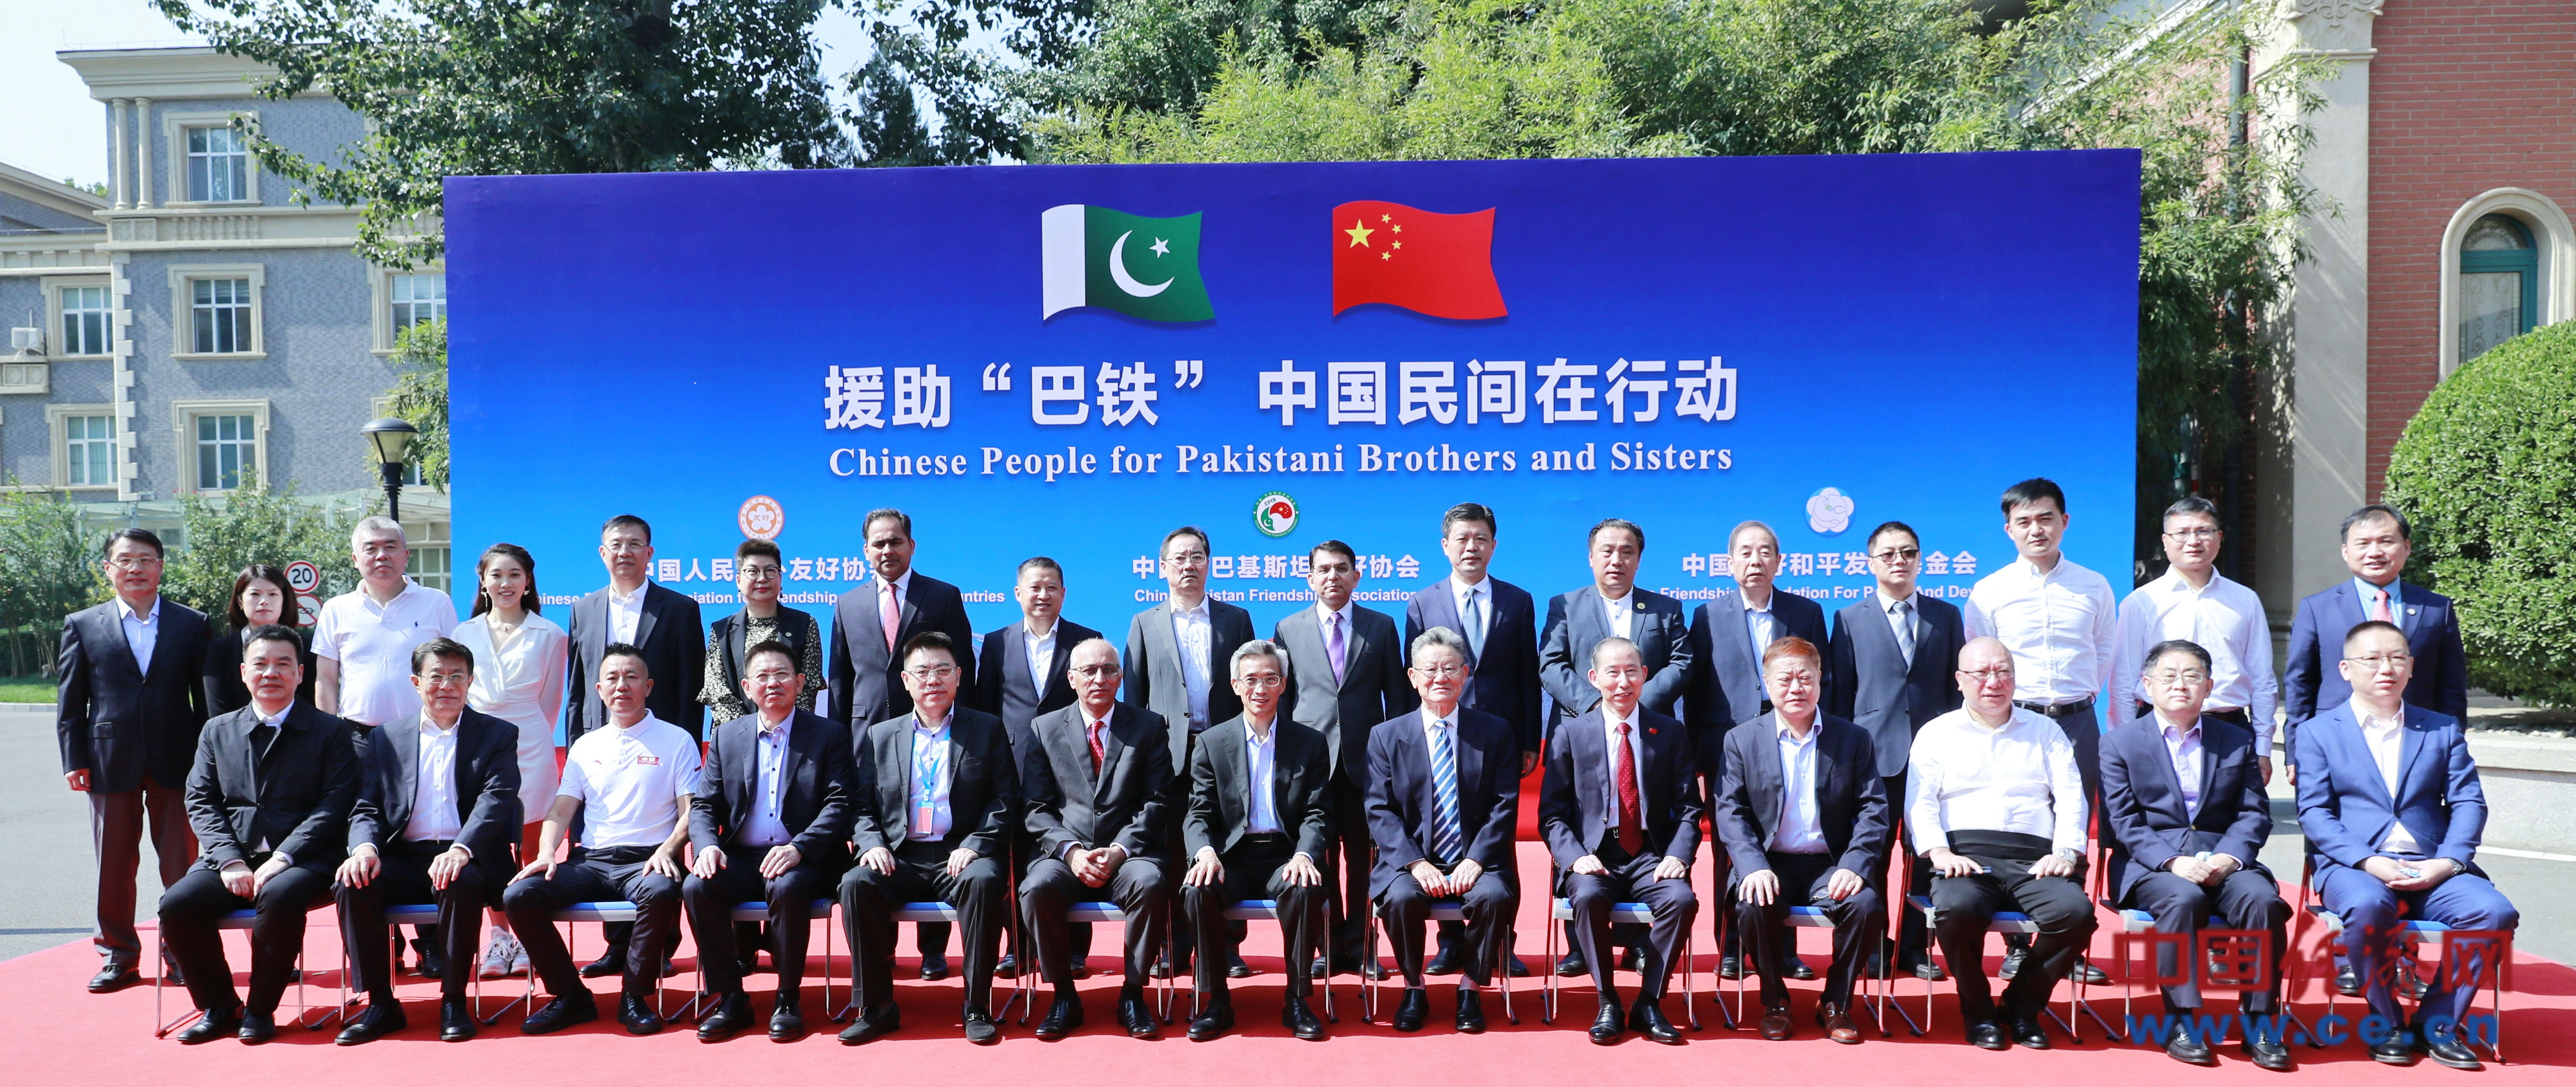 Chinese enterprises, associations donated RMB 125 million in cash & kind to Pakistan